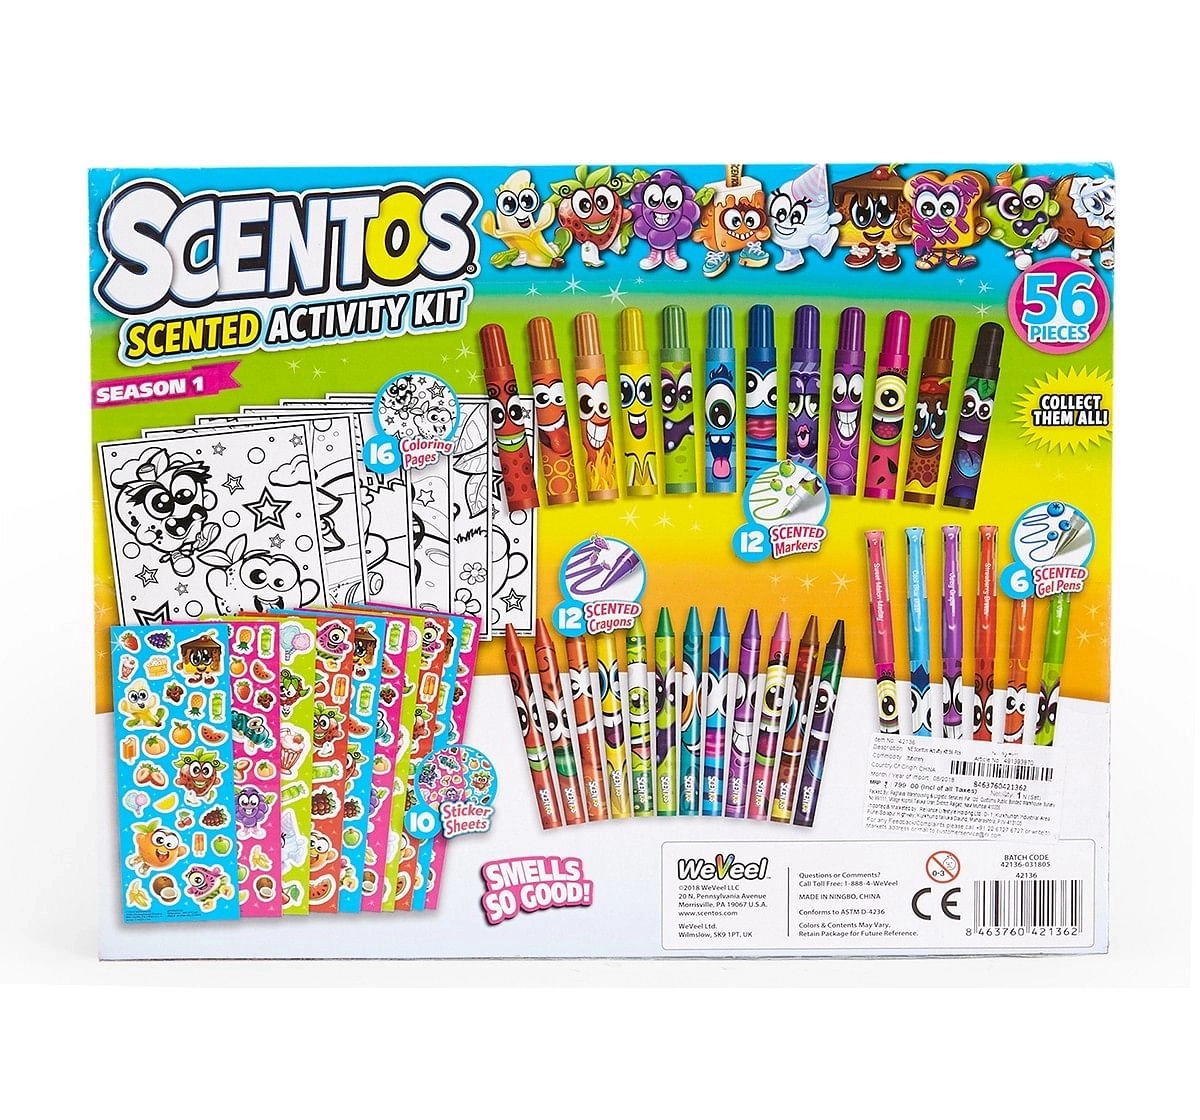 Scentos Activity Kit 56 Pcs School Stationery for Kids age 3Y+ 